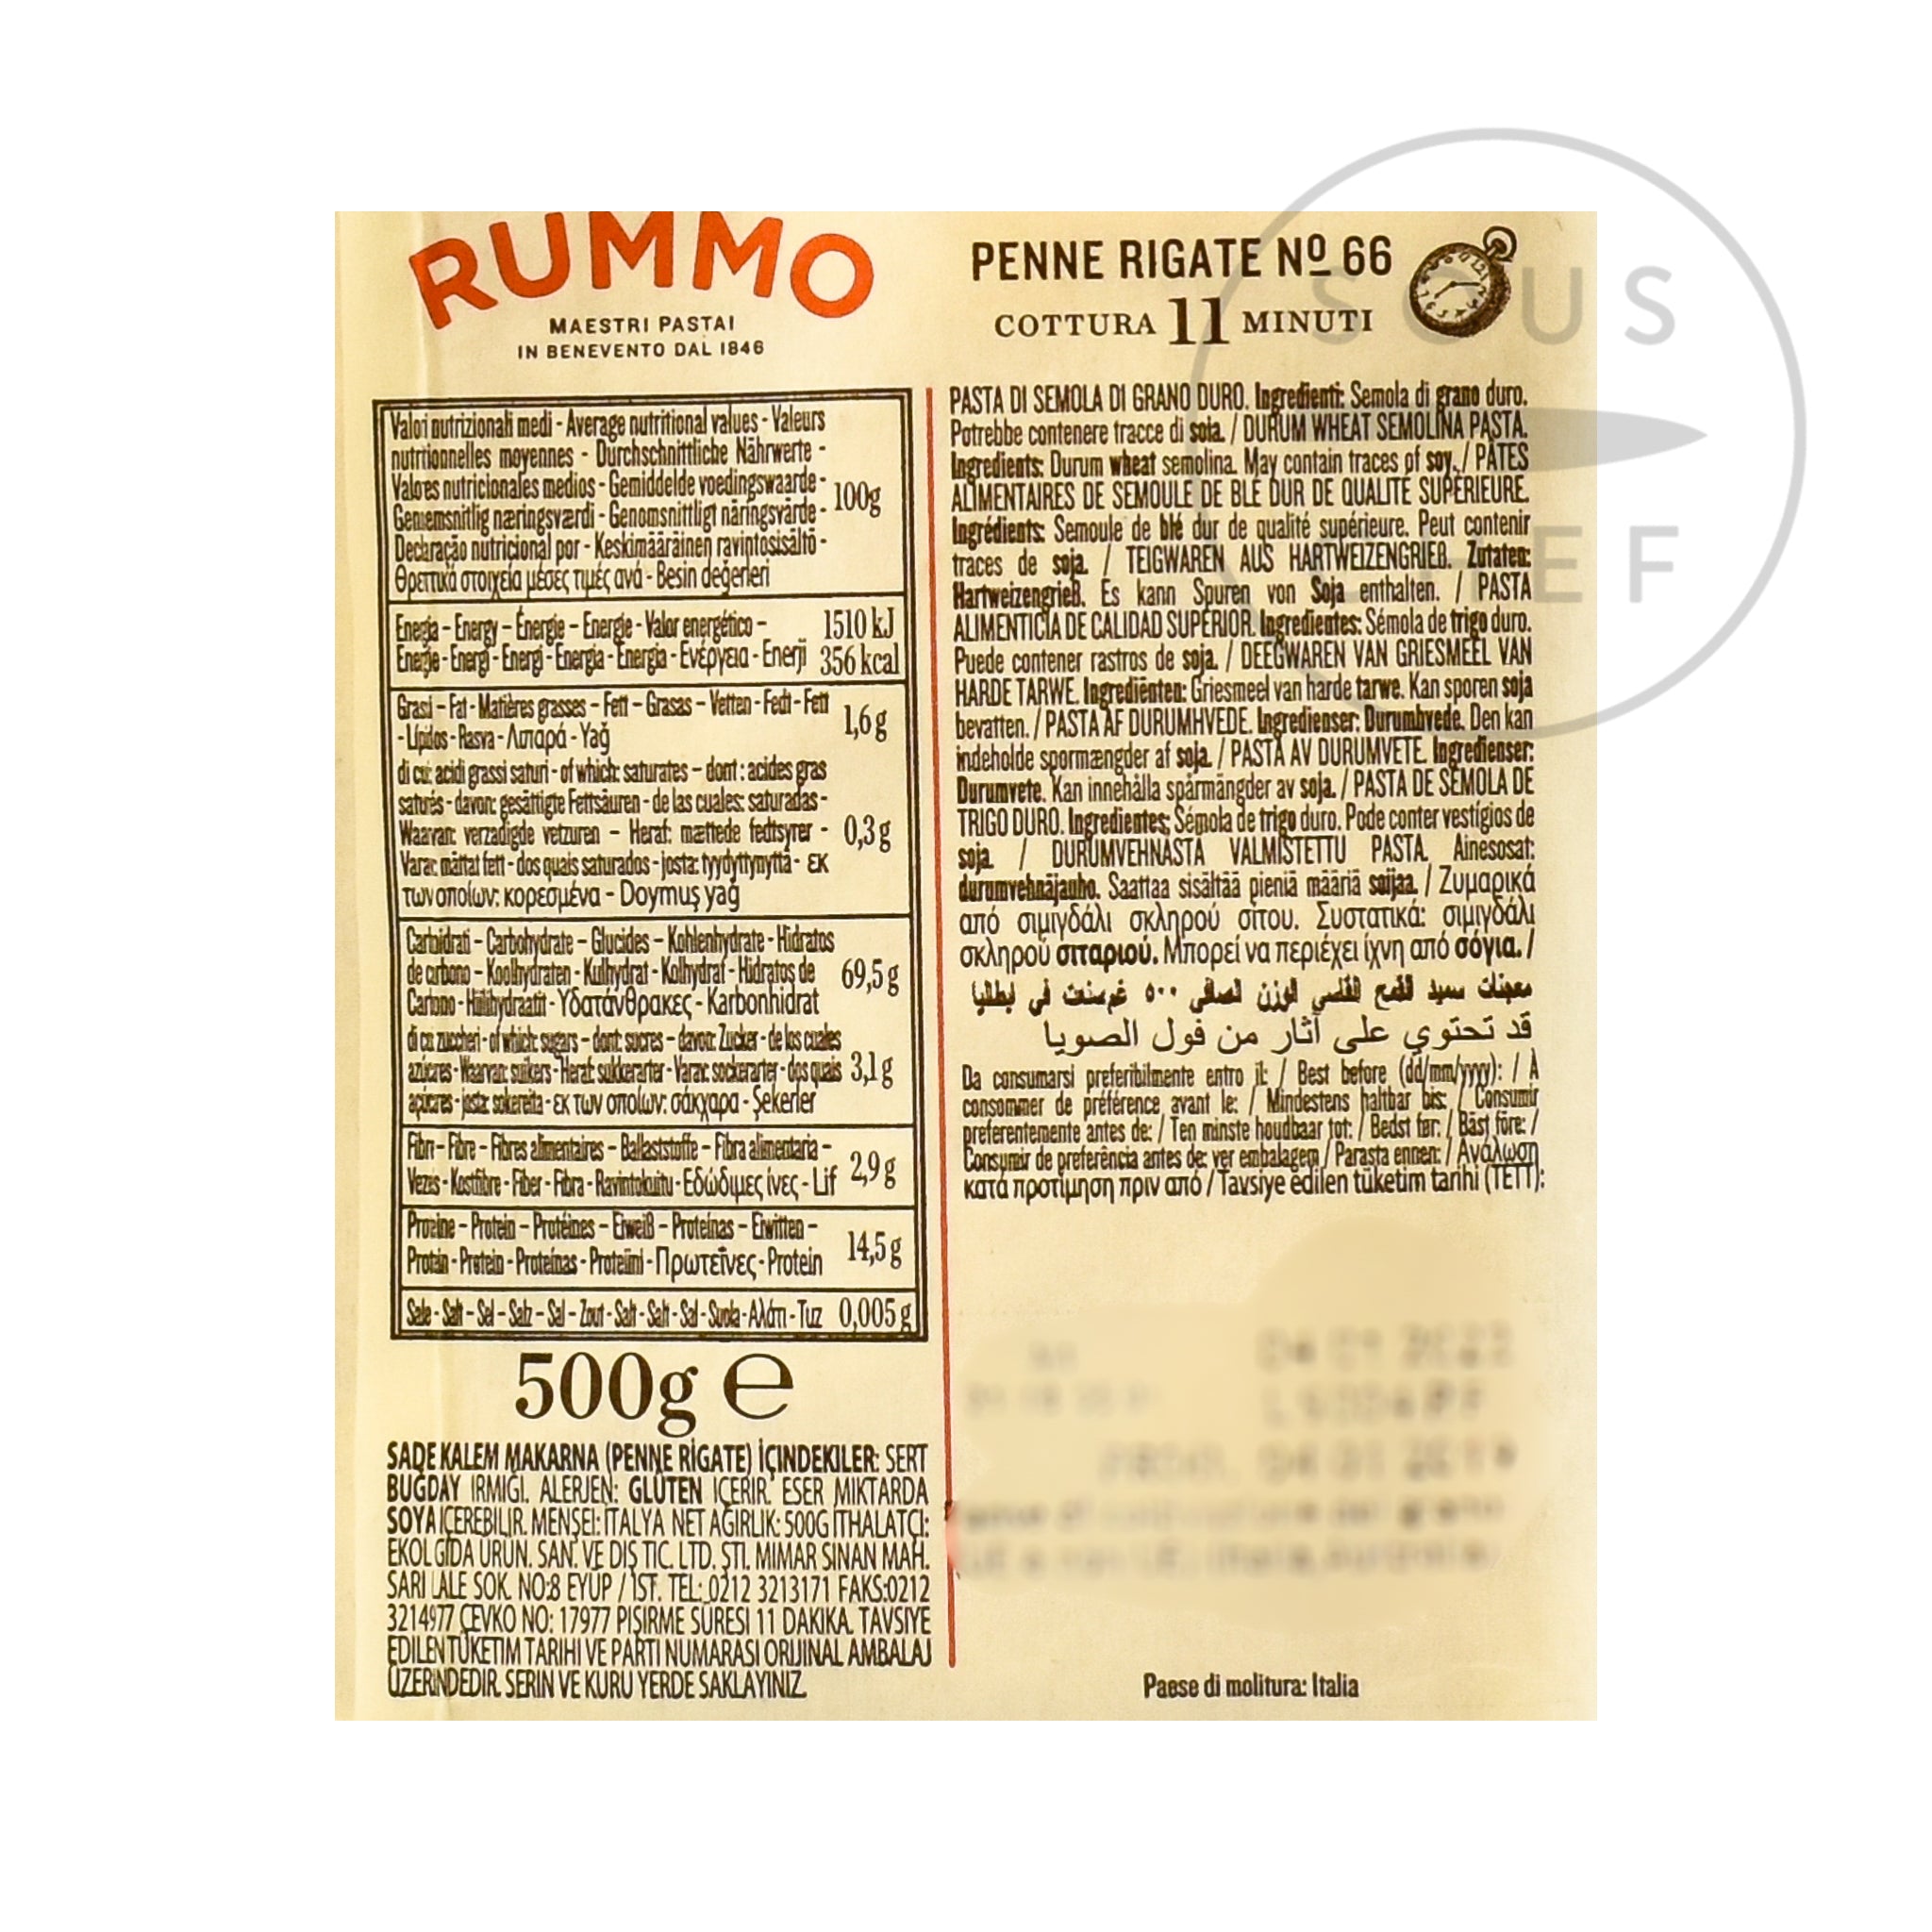 Rummo Penne Rigate 500g nutritional information ingredients